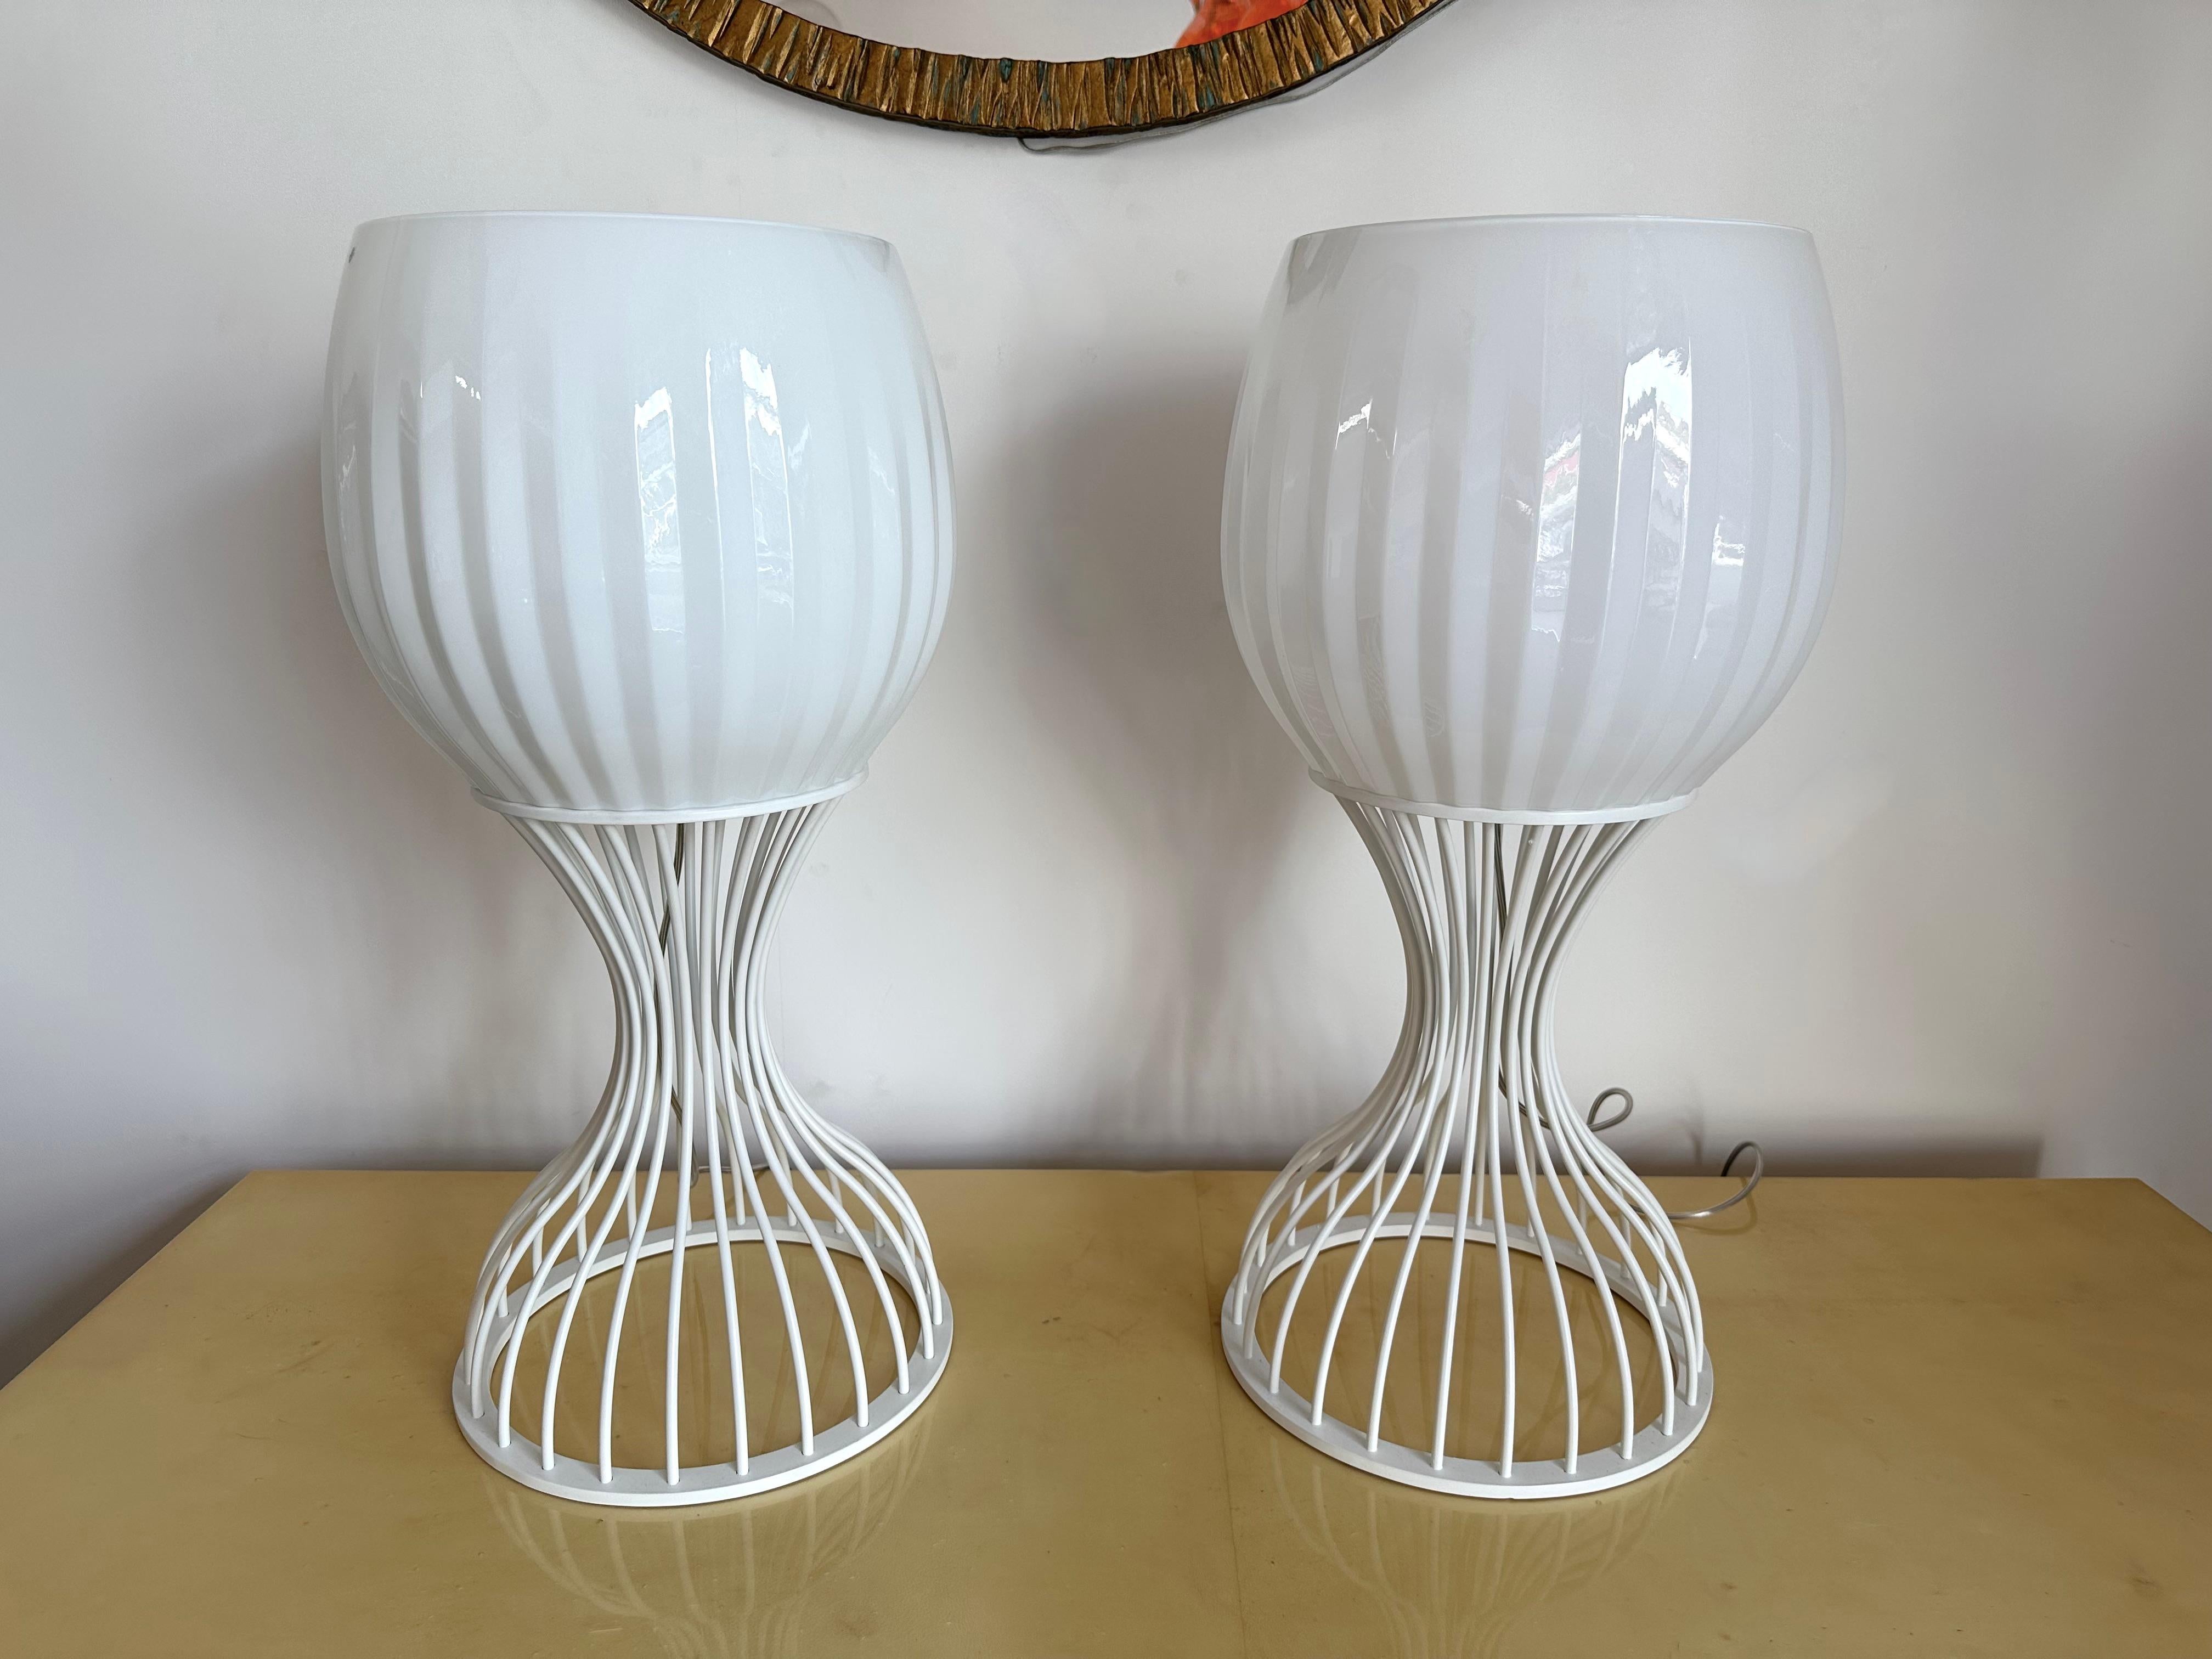 Pair of Lamps Cup Murano Glass and White Metal by Vistosi, Italy, 1990s For Sale 4